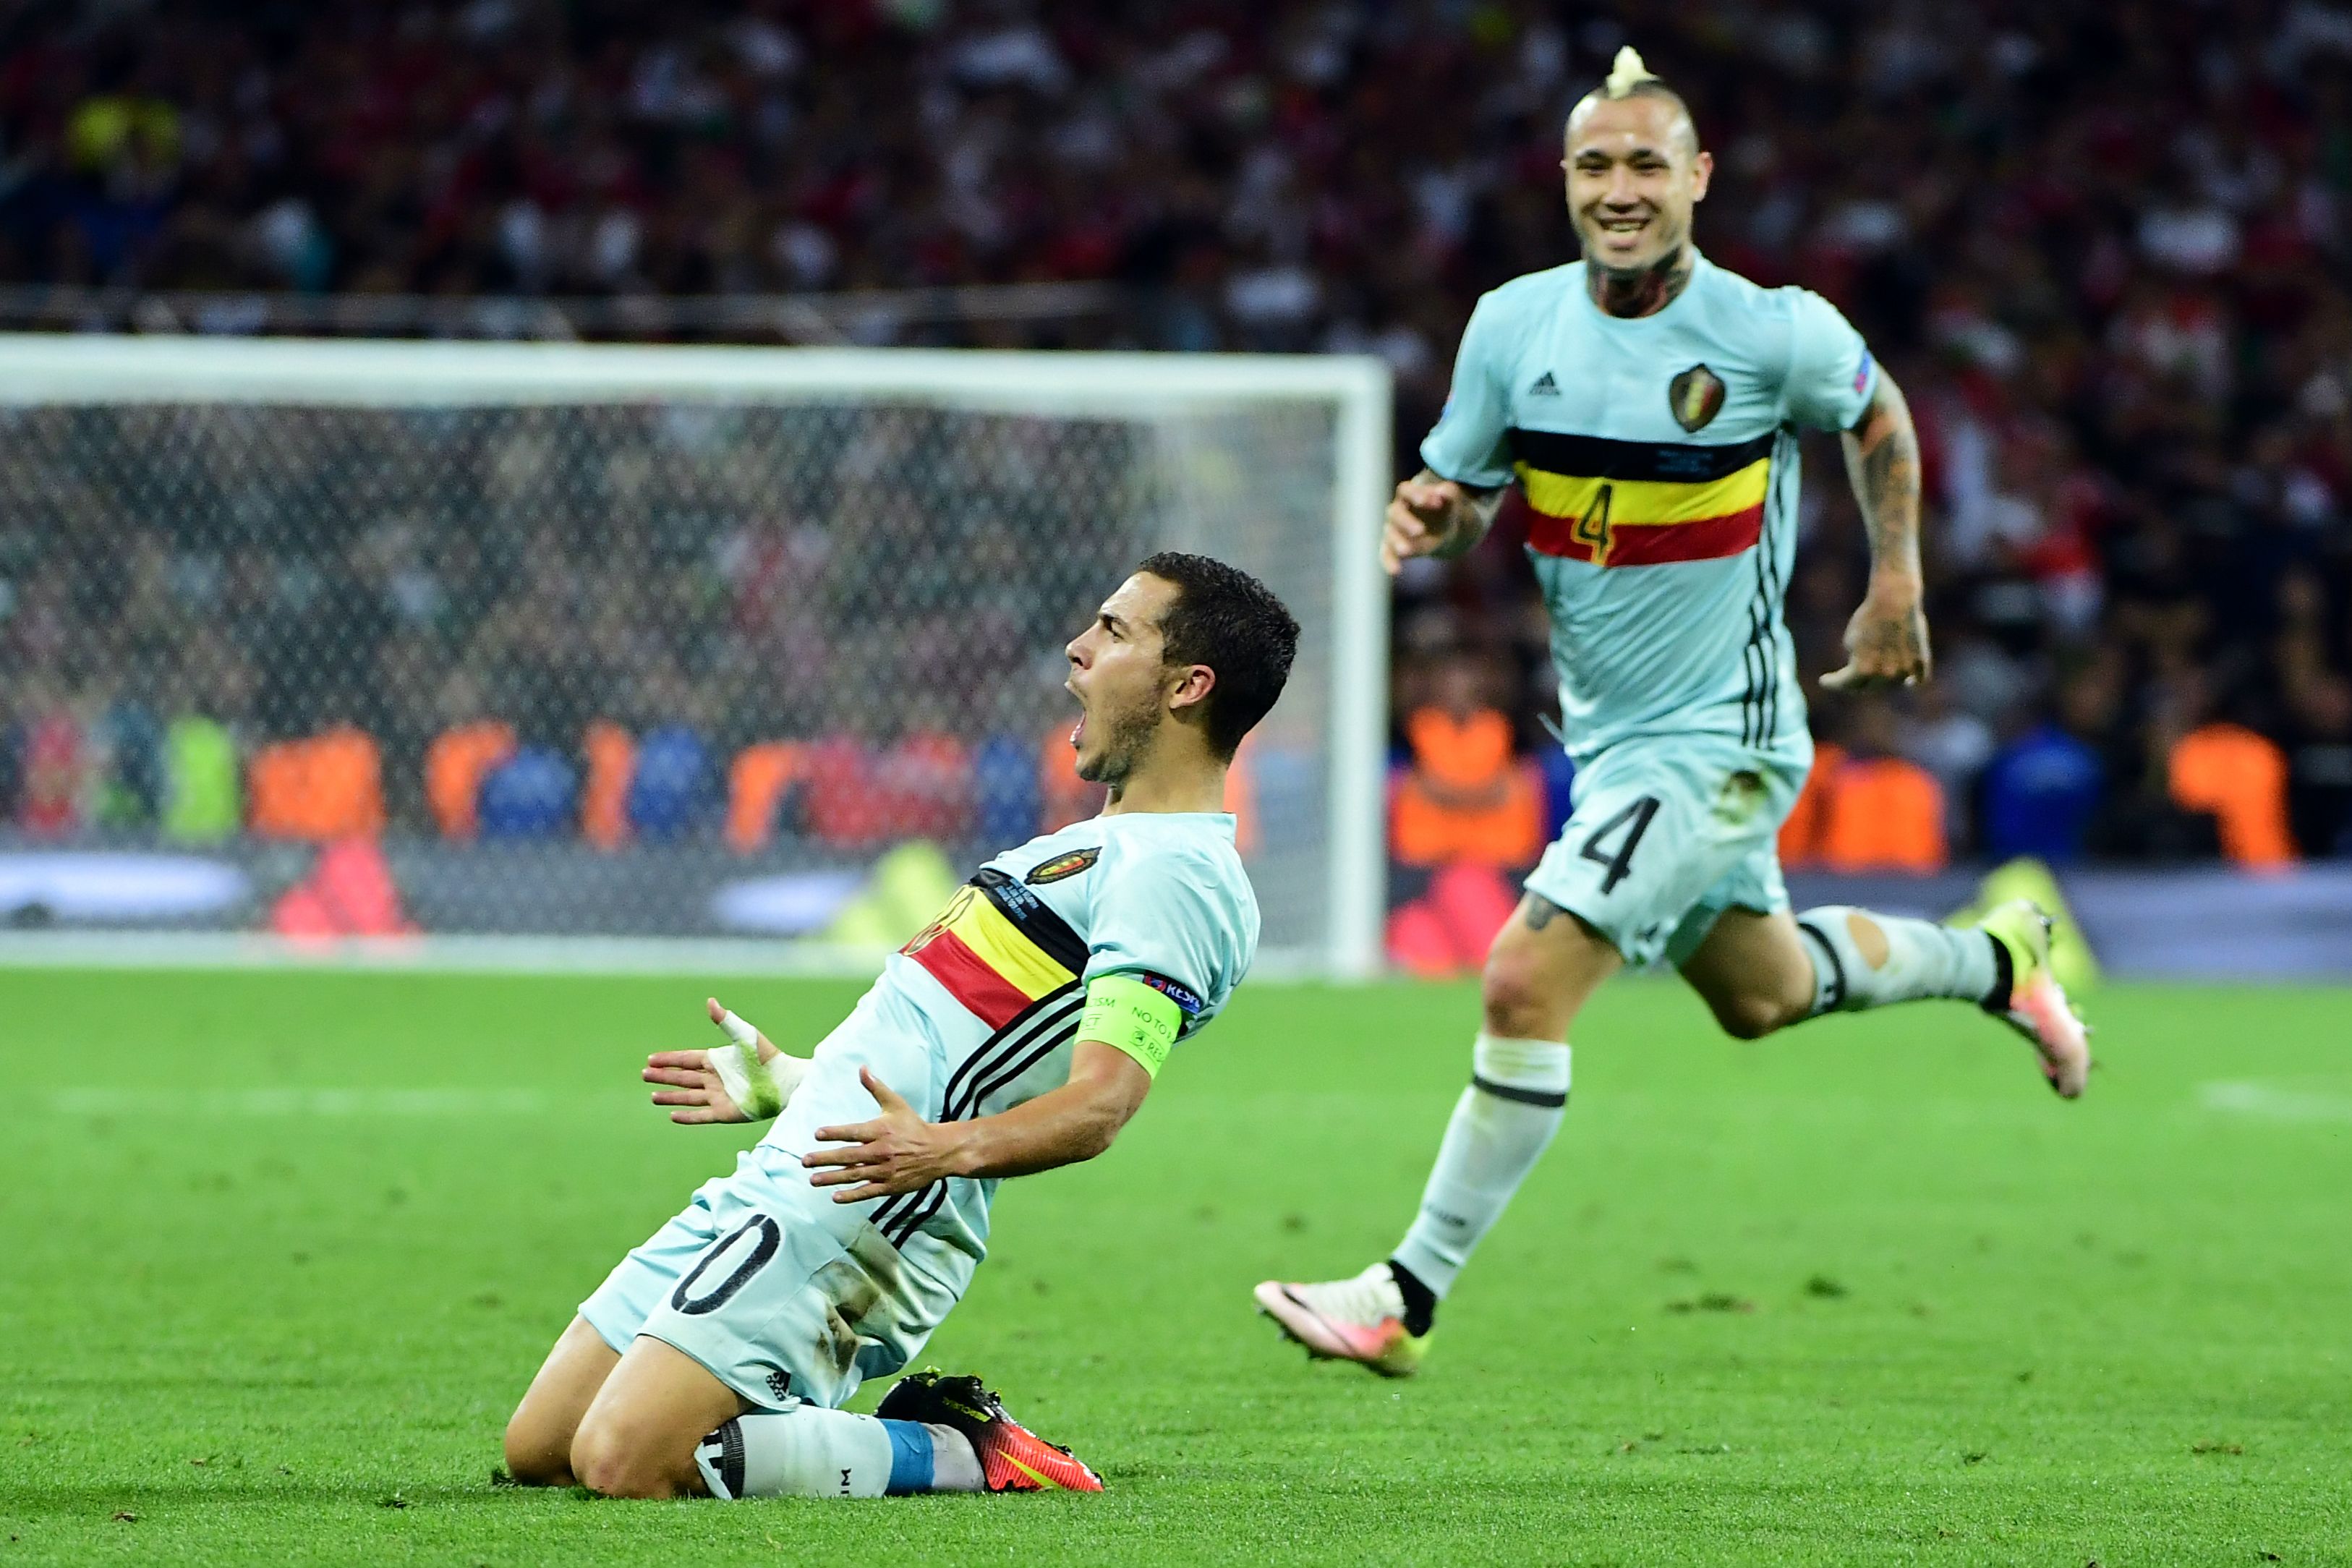 TOPSHOT - Belgium's forward Eden Hazard (L) celebrates after scoring his team's third goal  during the Euro 2016 round of 16 football match between Hungary and Belgium at the Stadium Municipal in Toulouse on June 26, 2016.   / AFP / EMMANUEL DUNAND        (Photo credit should read EMMANUEL DUNAND/AFP/Getty Images)